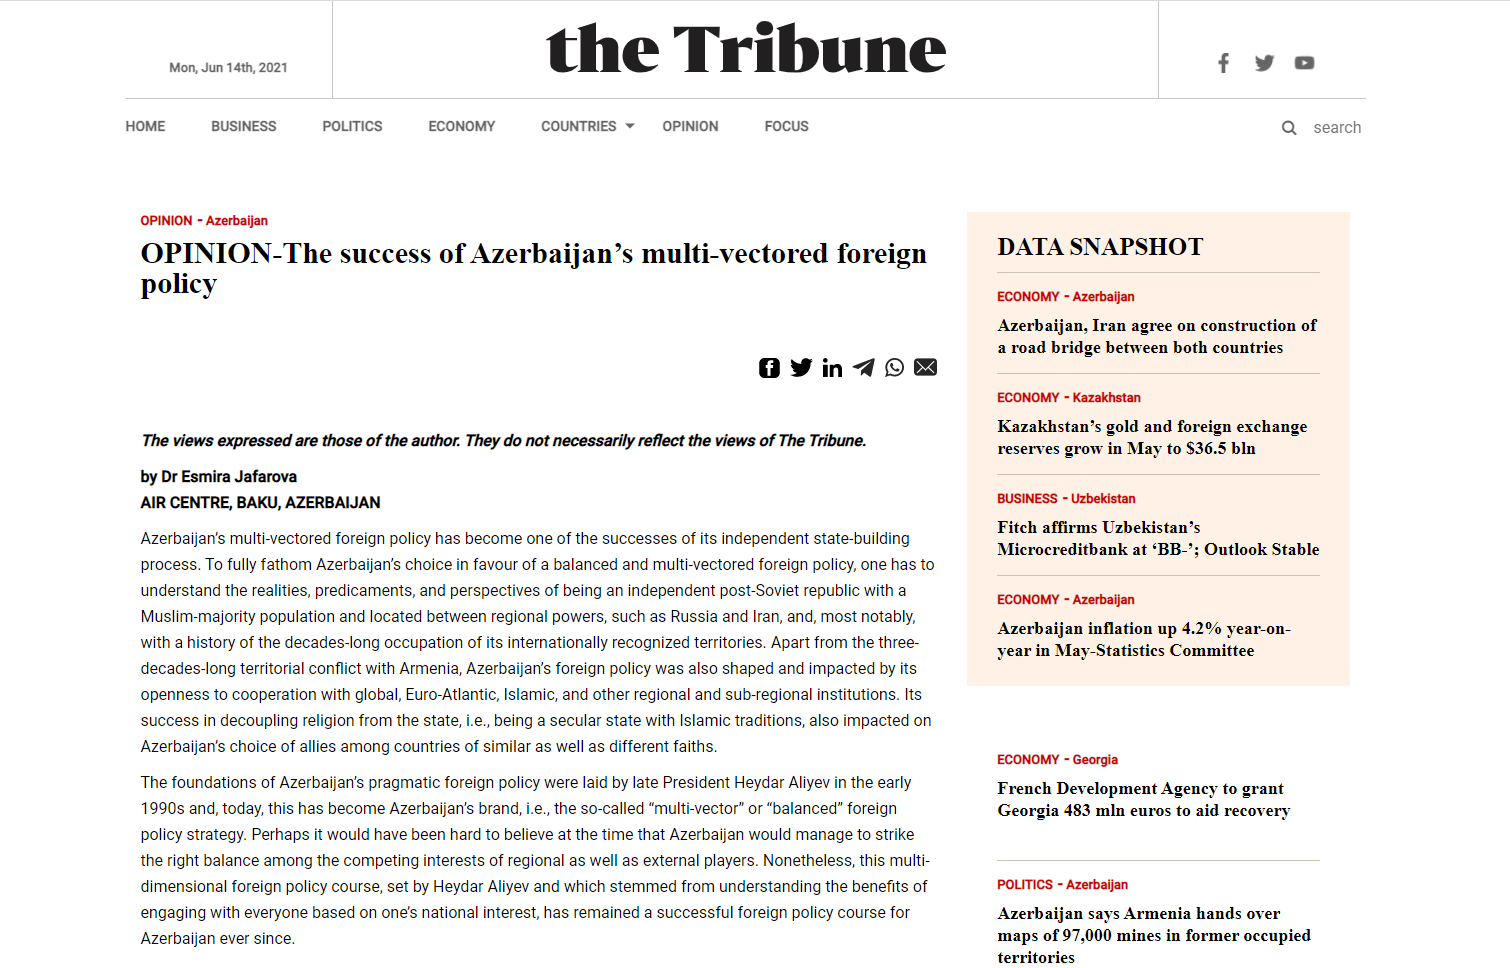 The success of Azerbaijan’s multi-vectored foreign policy